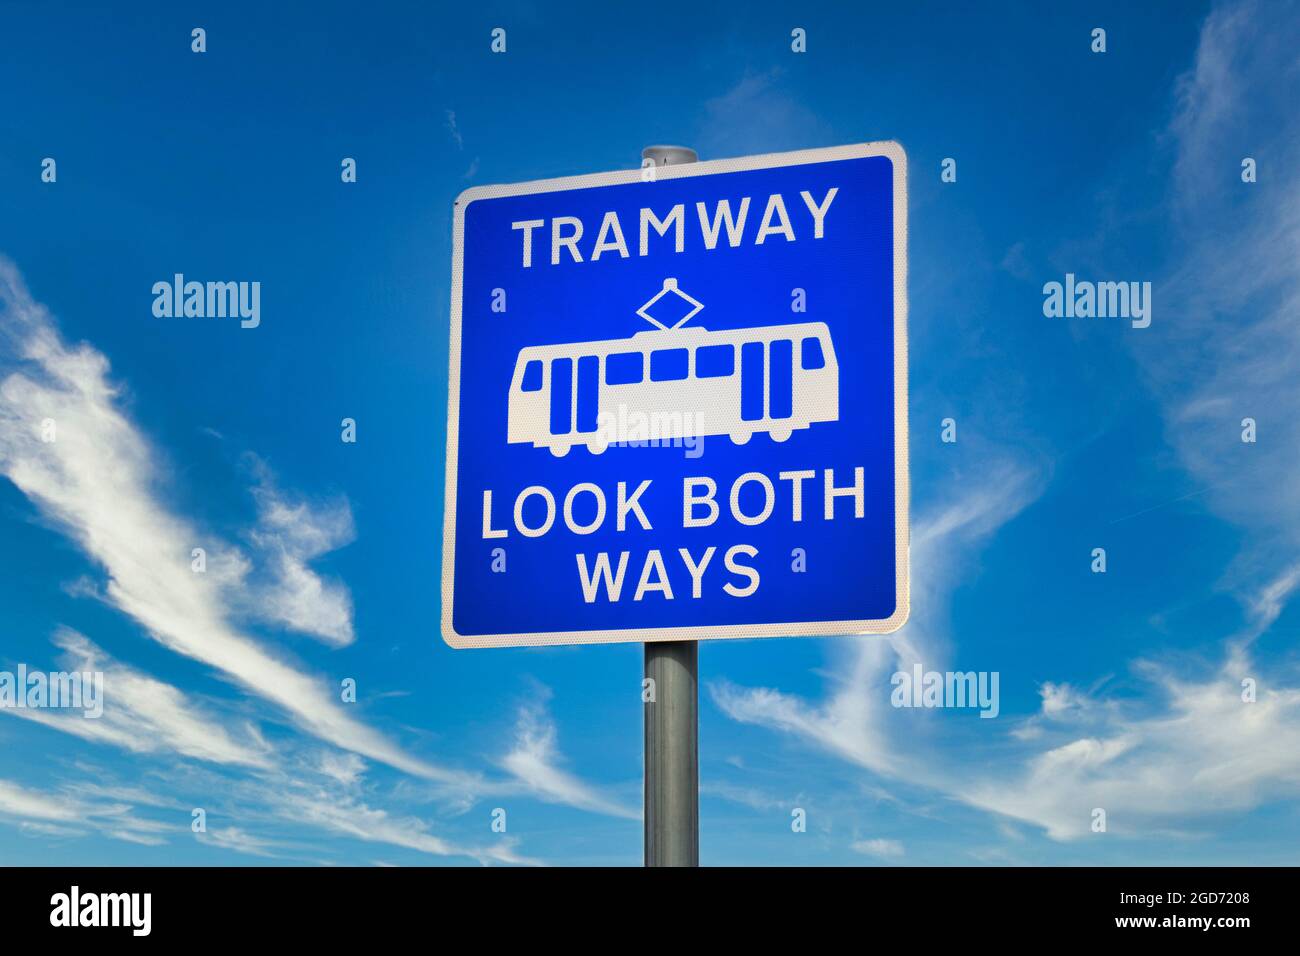 Tramway safety blue sign look both ways  Stock Photo